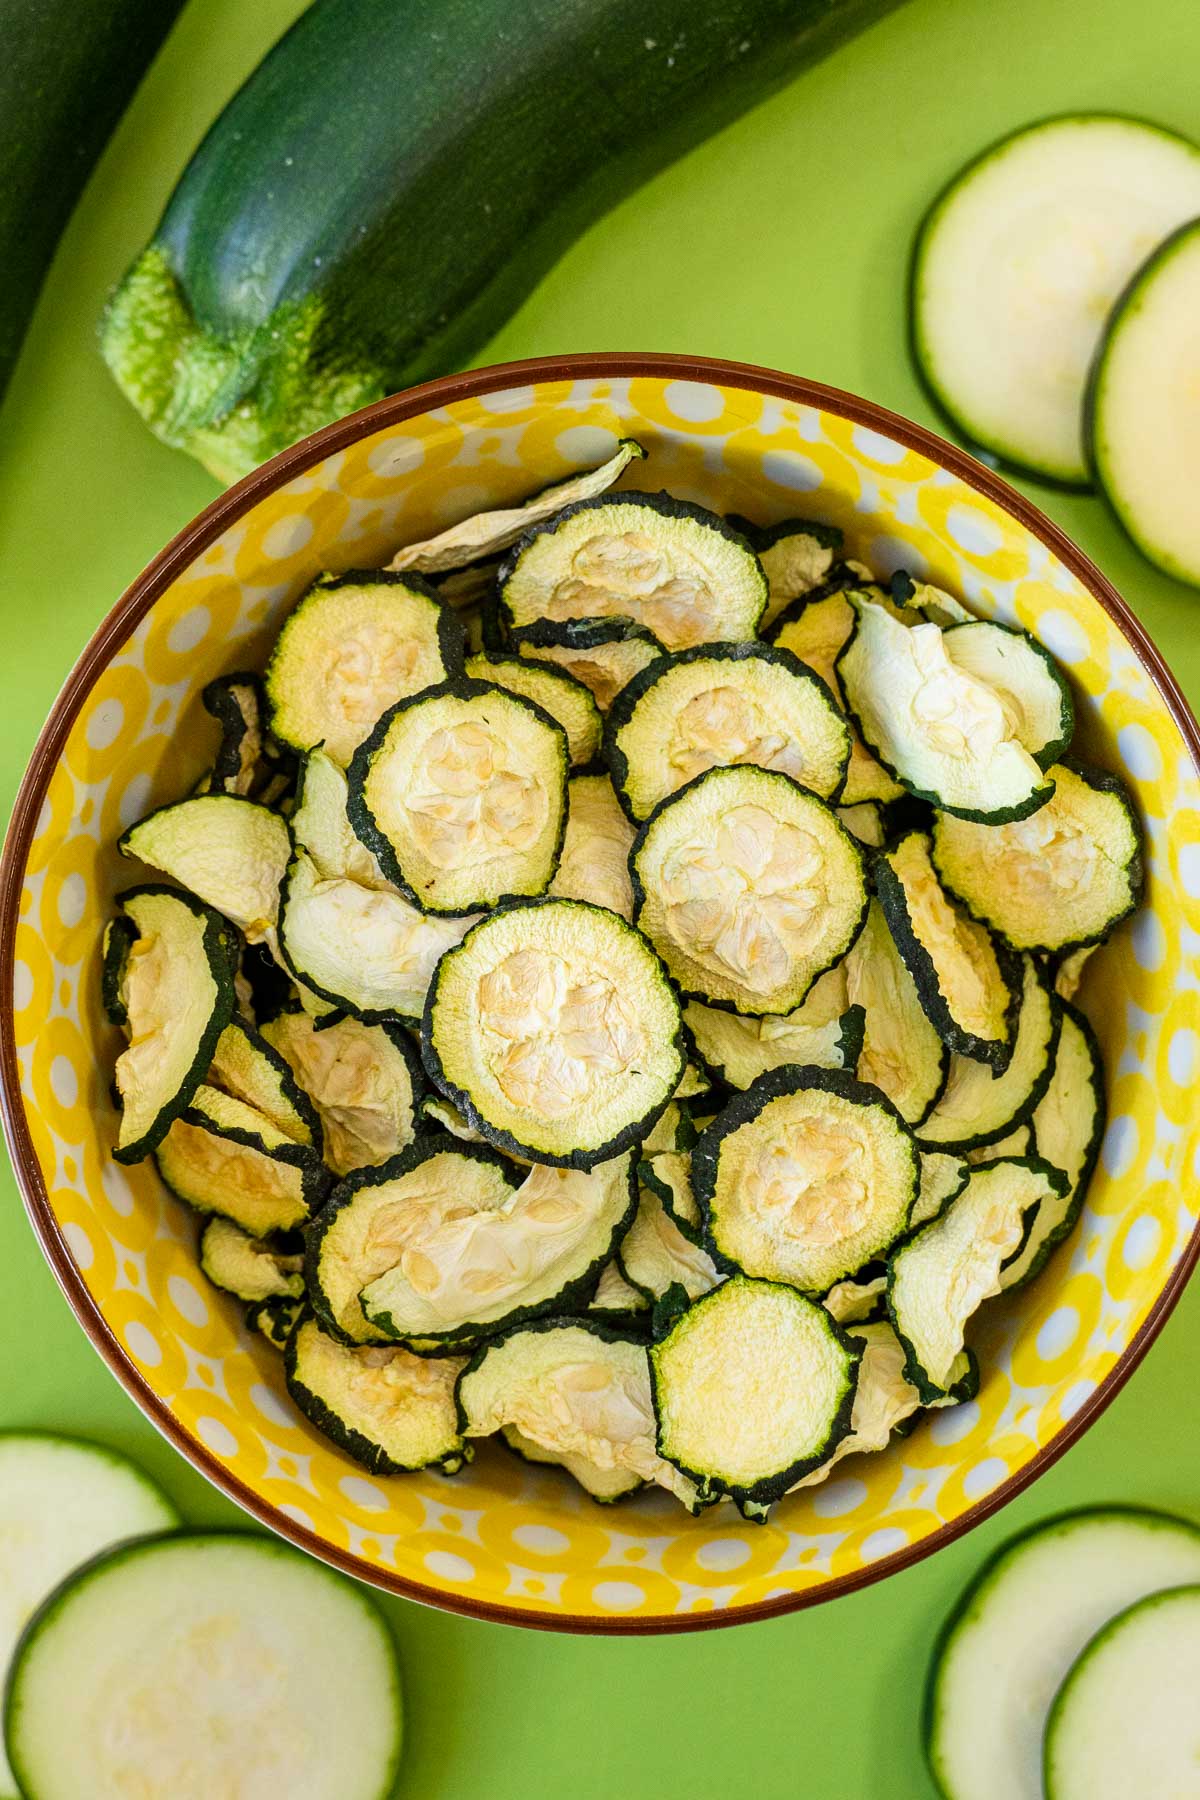 Zucchini chips in a yellow bowl